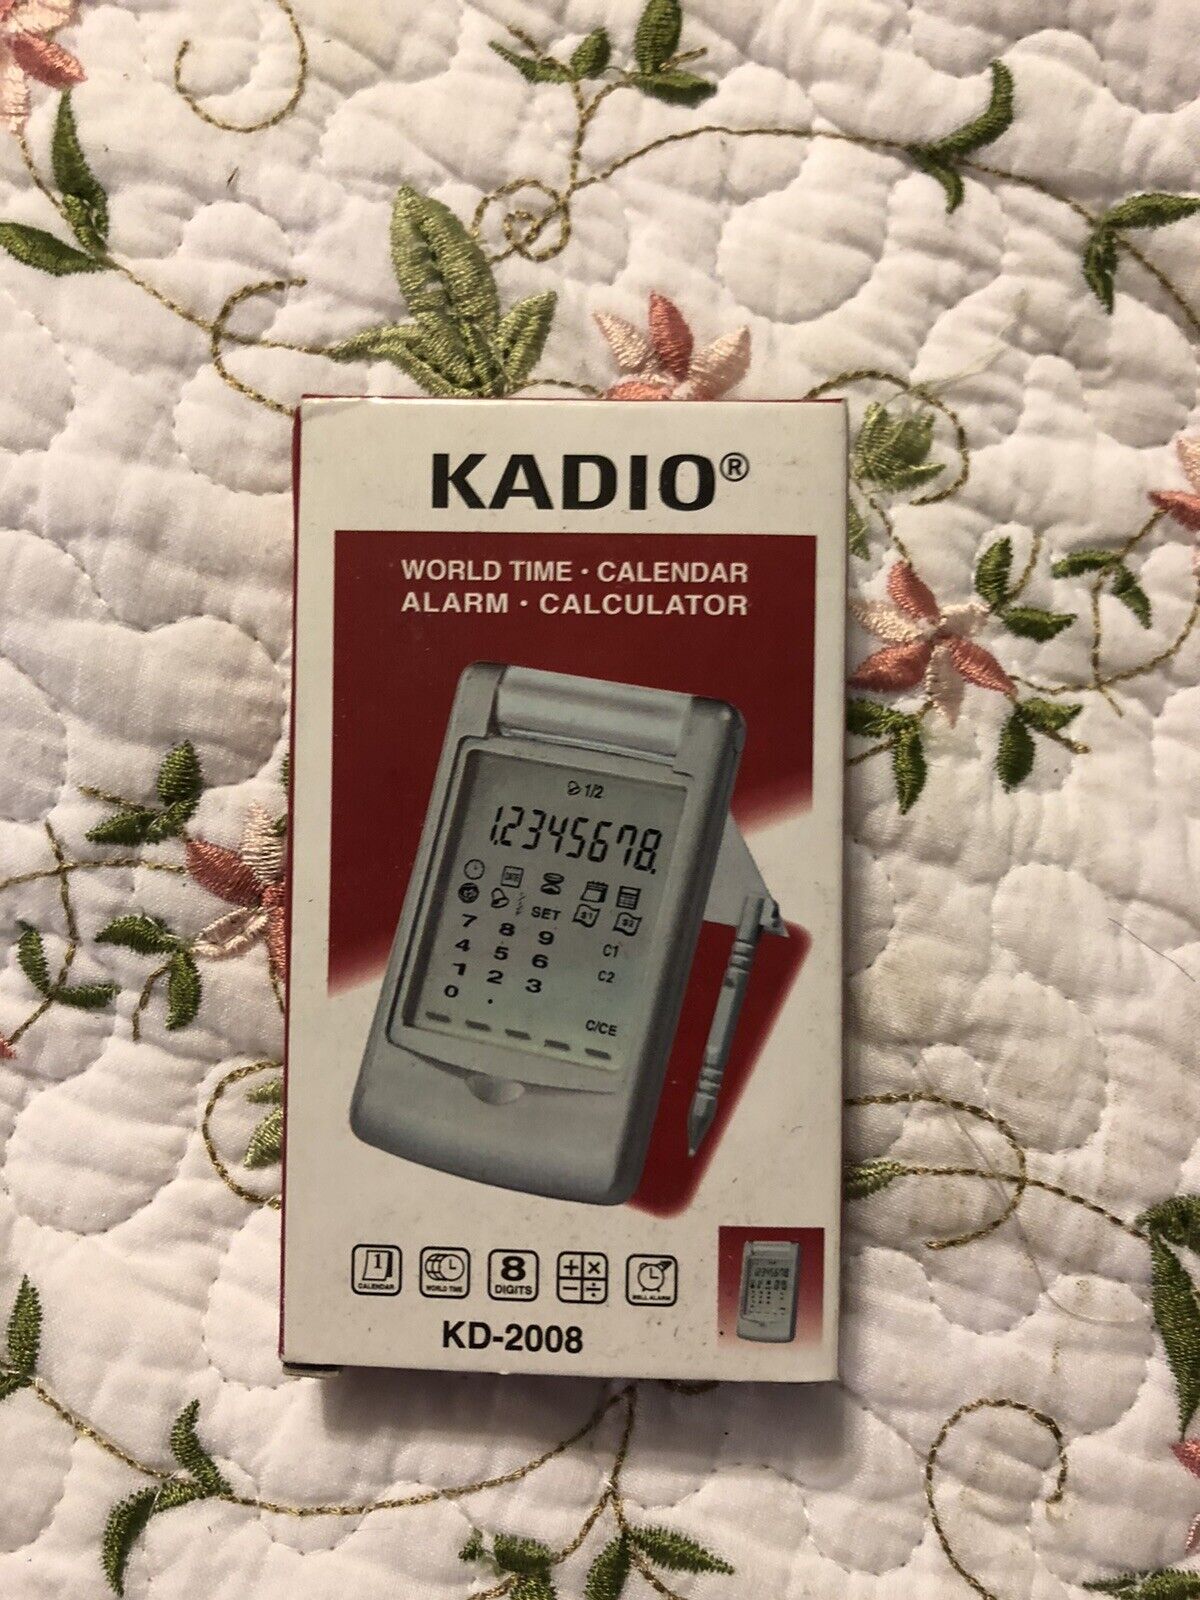 New Kadio Kd-2008 World Time Alarm Hand Calendar Held Calculator Be super welcome Outlet sale feature